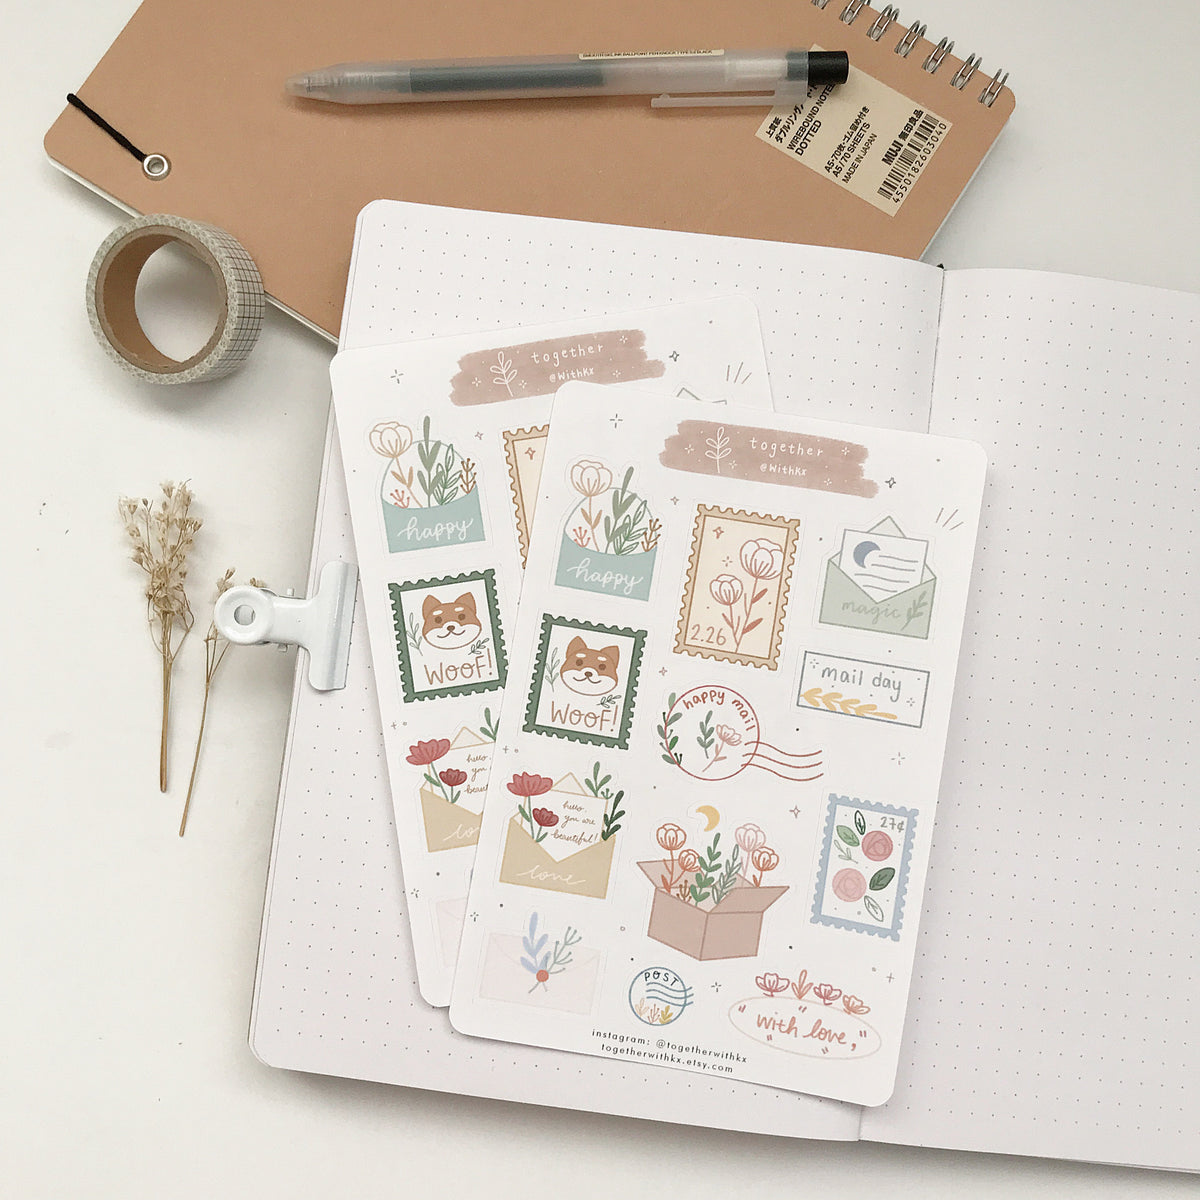 Happy Mail Day Sticker Sheet – together @withkx